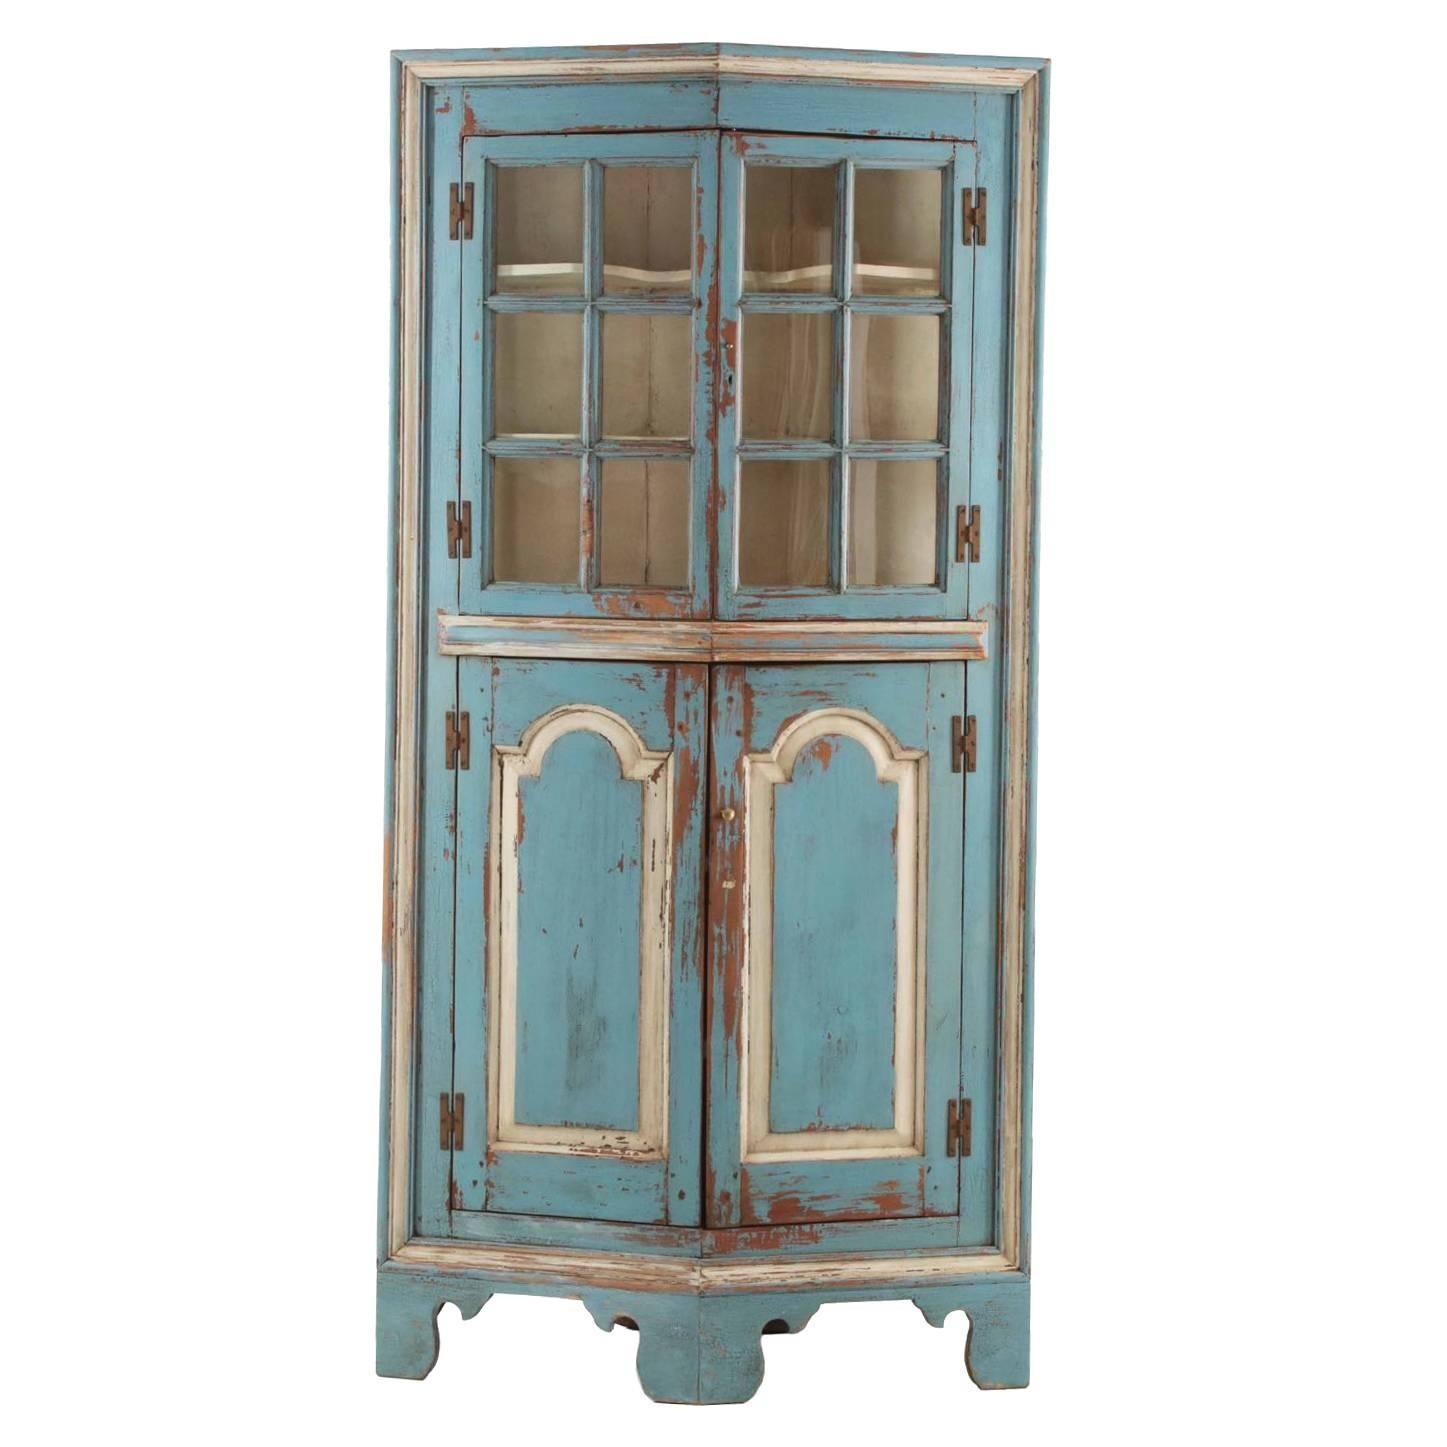 19th Century American Blue Painted Corner Cabinet in Eastern Shore style